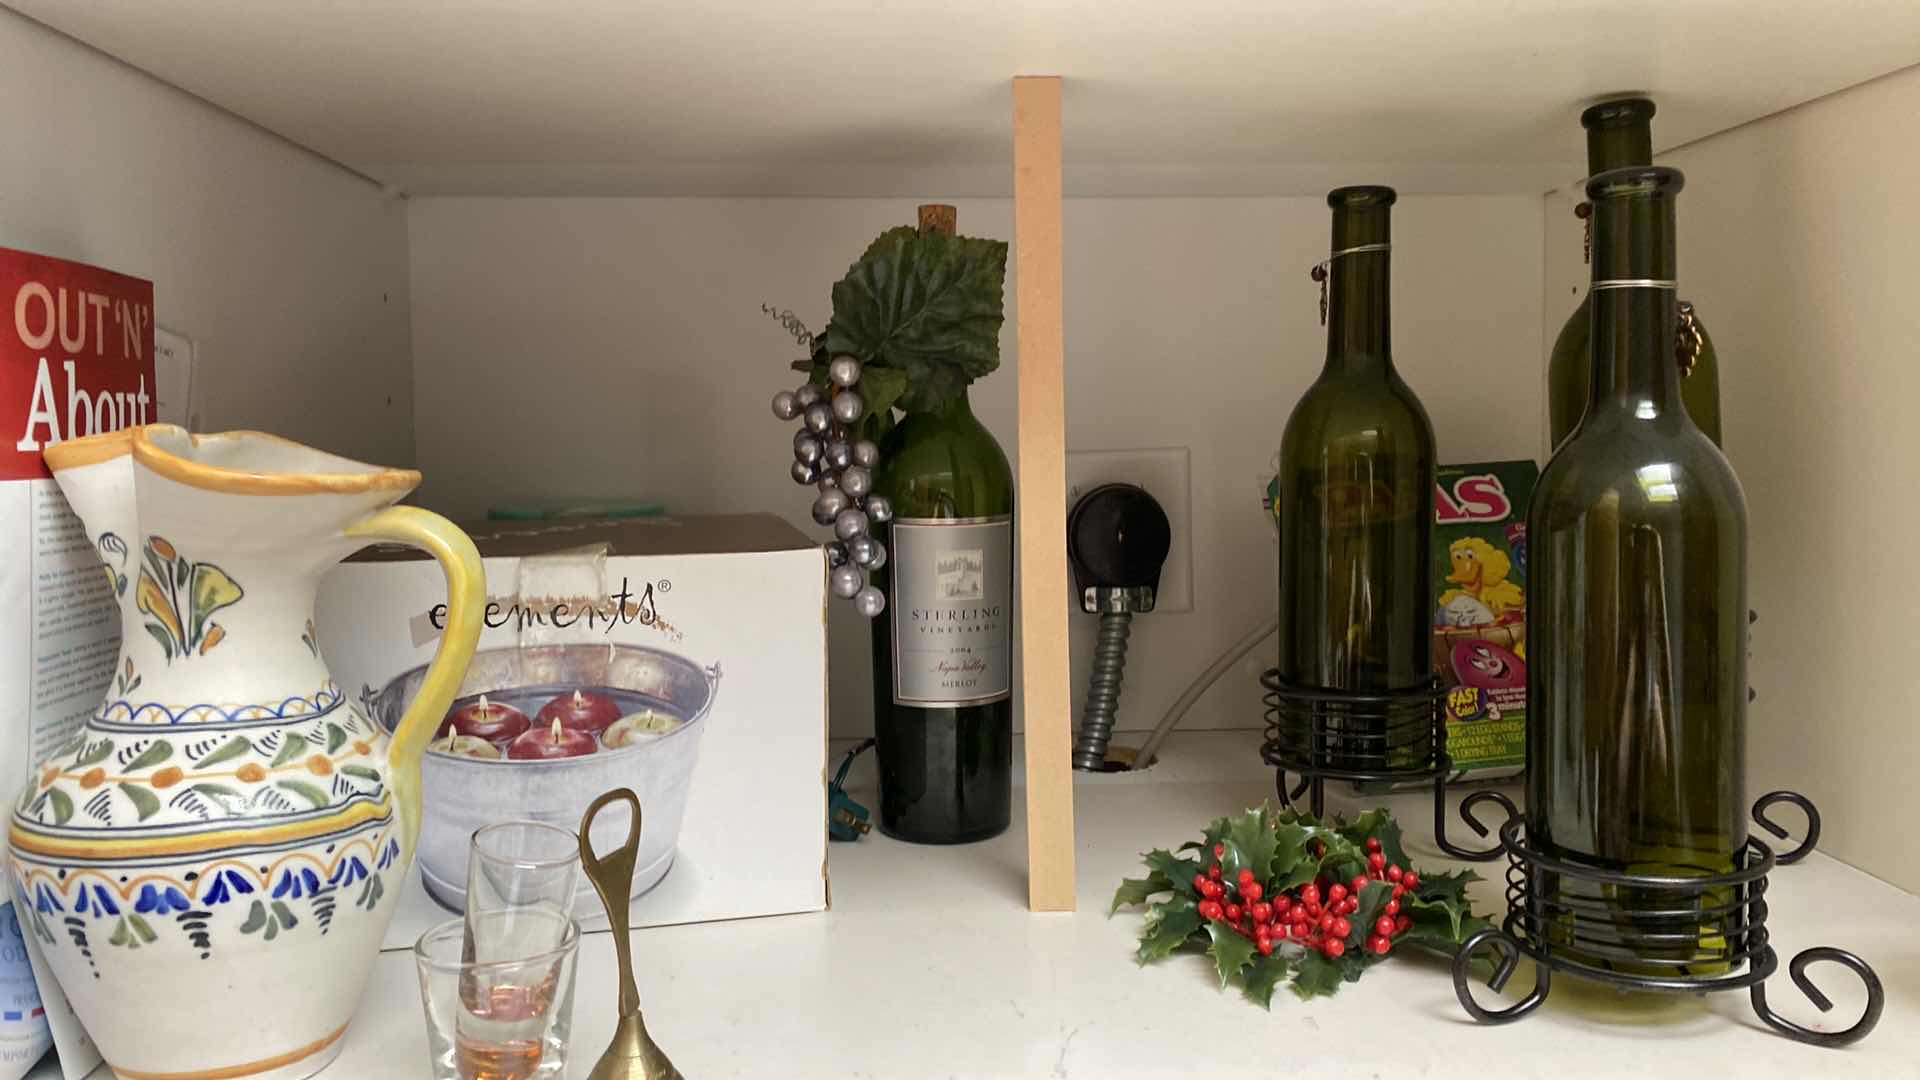 Photo 3 of CONTENTS OF KITCHEN CABINET SHAKERS, WINE DECOR AND MORE